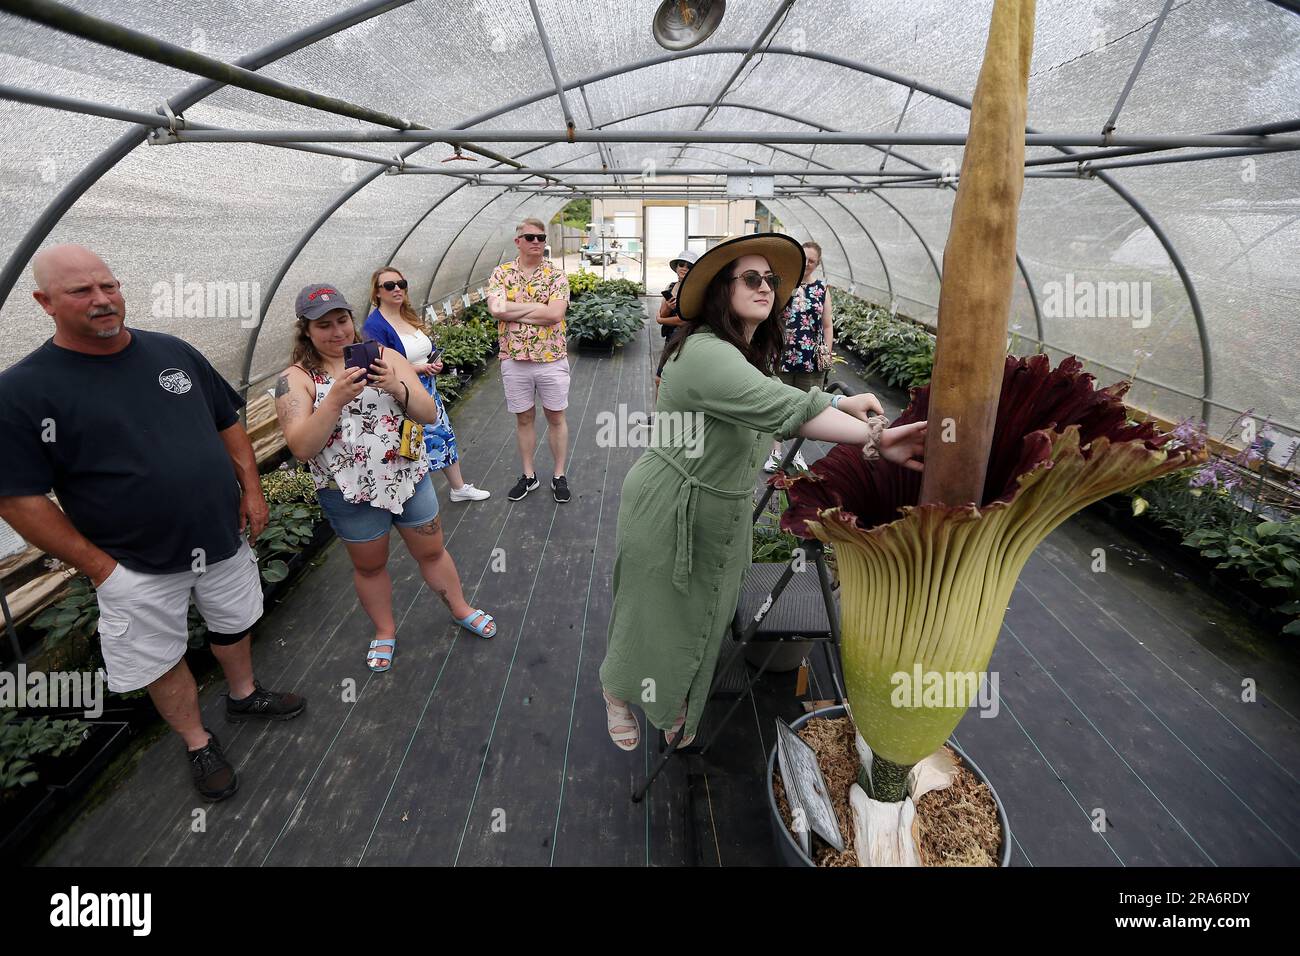 July 1, 2023, Raleigh, North Carolina, USA: EMMA HEPWORTH touches the tall spadix of ''˜HOMO ERECTUS, ' a rare corpse flower during the second day of its bloom at Juniper Level Botanical Garden in Raleigh, NC. Amorphophallus titanum is one of the biggest, stinkiest flowers in the plant kingdom and is commonly known as the corpse flower due to its smell of rotting flesh as it blooms. It typically takes 7-10 years of vegetative growth before the corpse flower blooms for a total of 2-3 days. The flower is so rare that fewer than 1,000 Titan Arums have flowered in cultivation worldwide. (Credit I Stock Photo